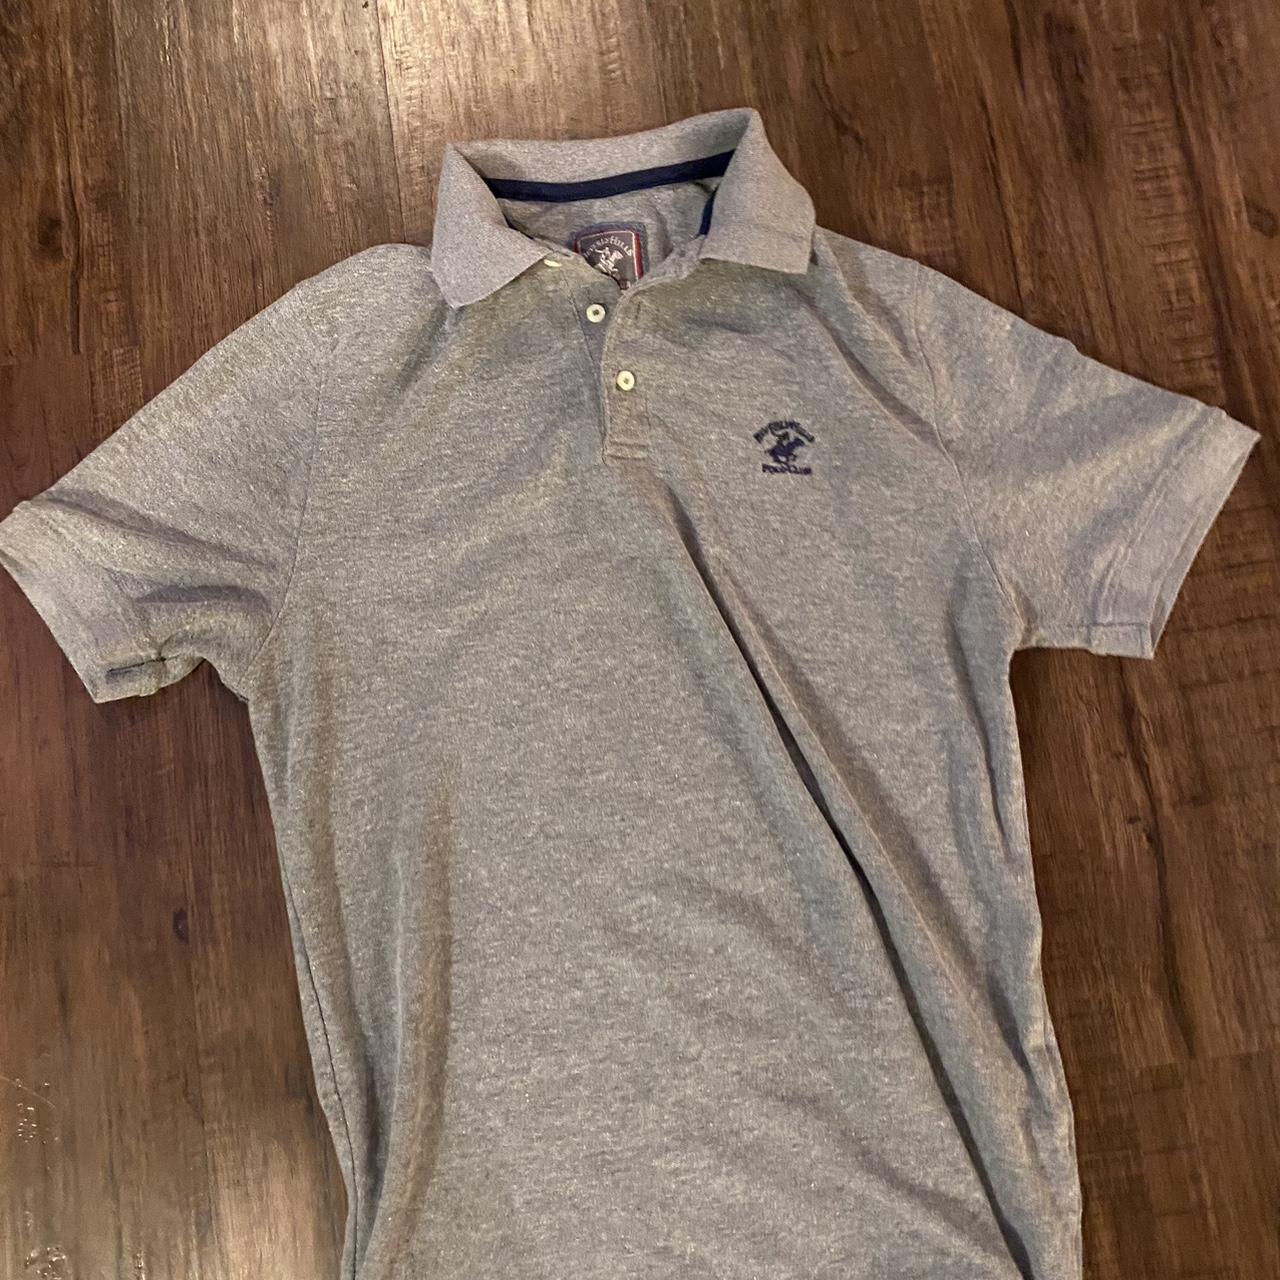 Beverly Hills Polo Club Men's Grey and Black Polo-shirts (2)